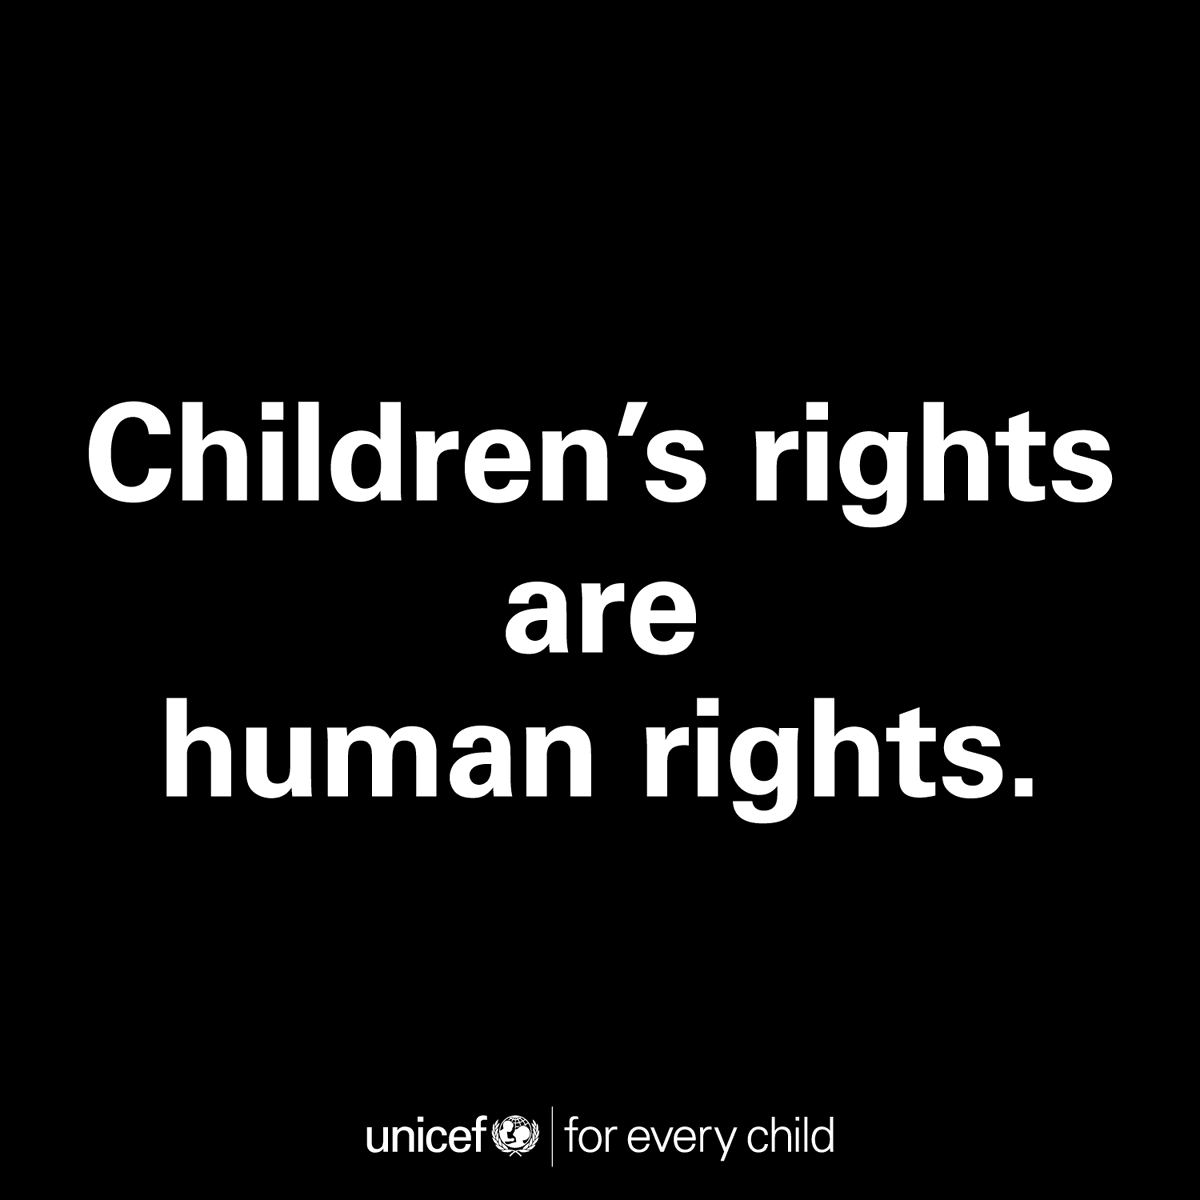 Children’s rights are human rights. However, today, in too many places around the world, children’s rights are under attack. On Monday's #WorldChildrensDay, join @UNICEF in calling for peace for every child. unicef.org/world-children…